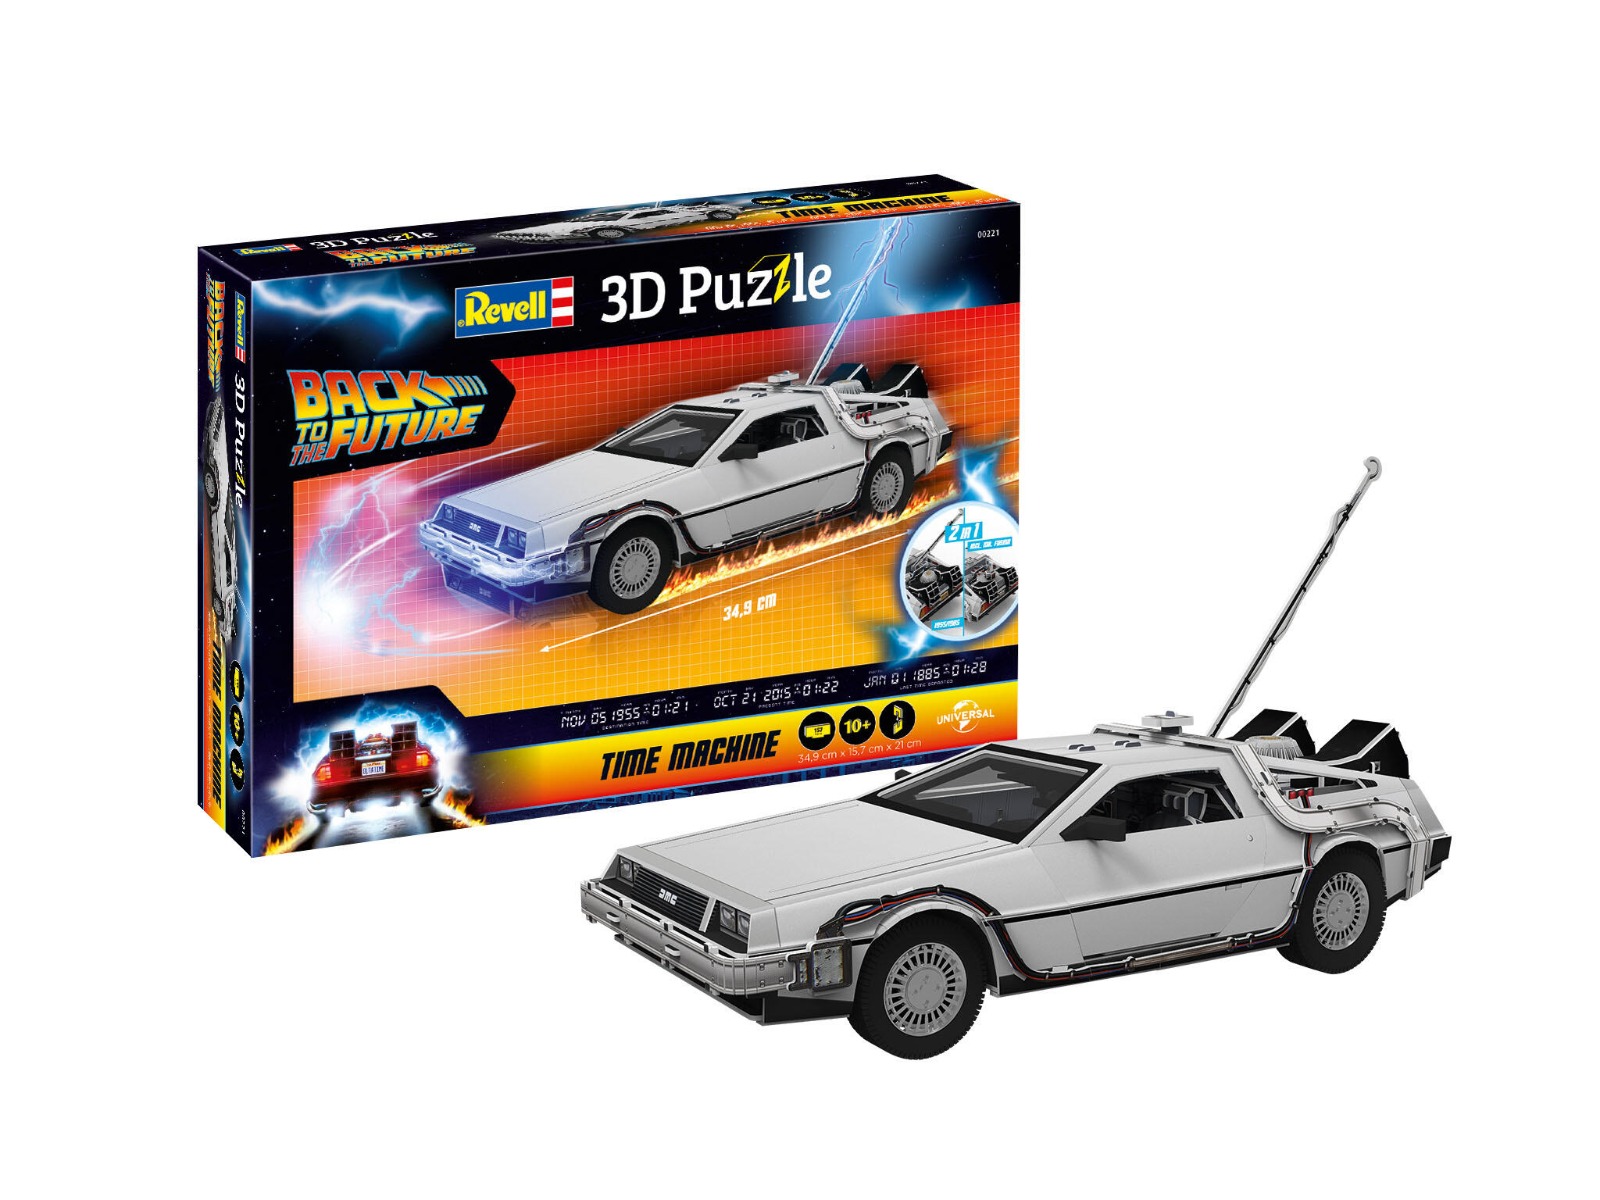 Revell 3D Puzzle 00221 - Time Machine - Back to the Future